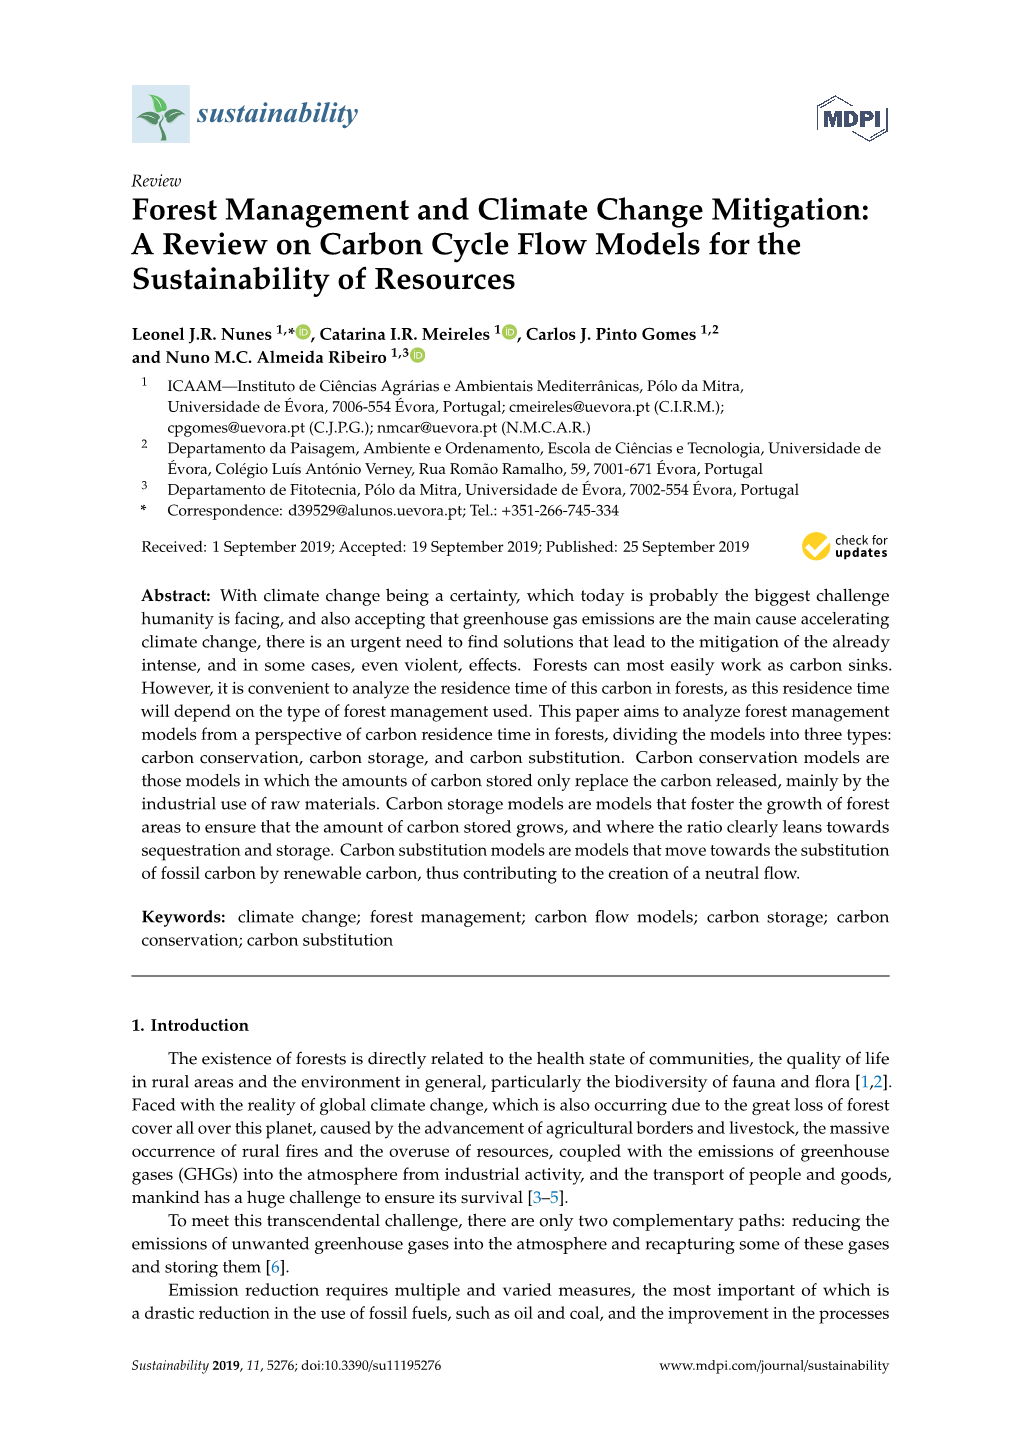 A Review on Carbon Cycle Flow Models for the Sustainability of Resources